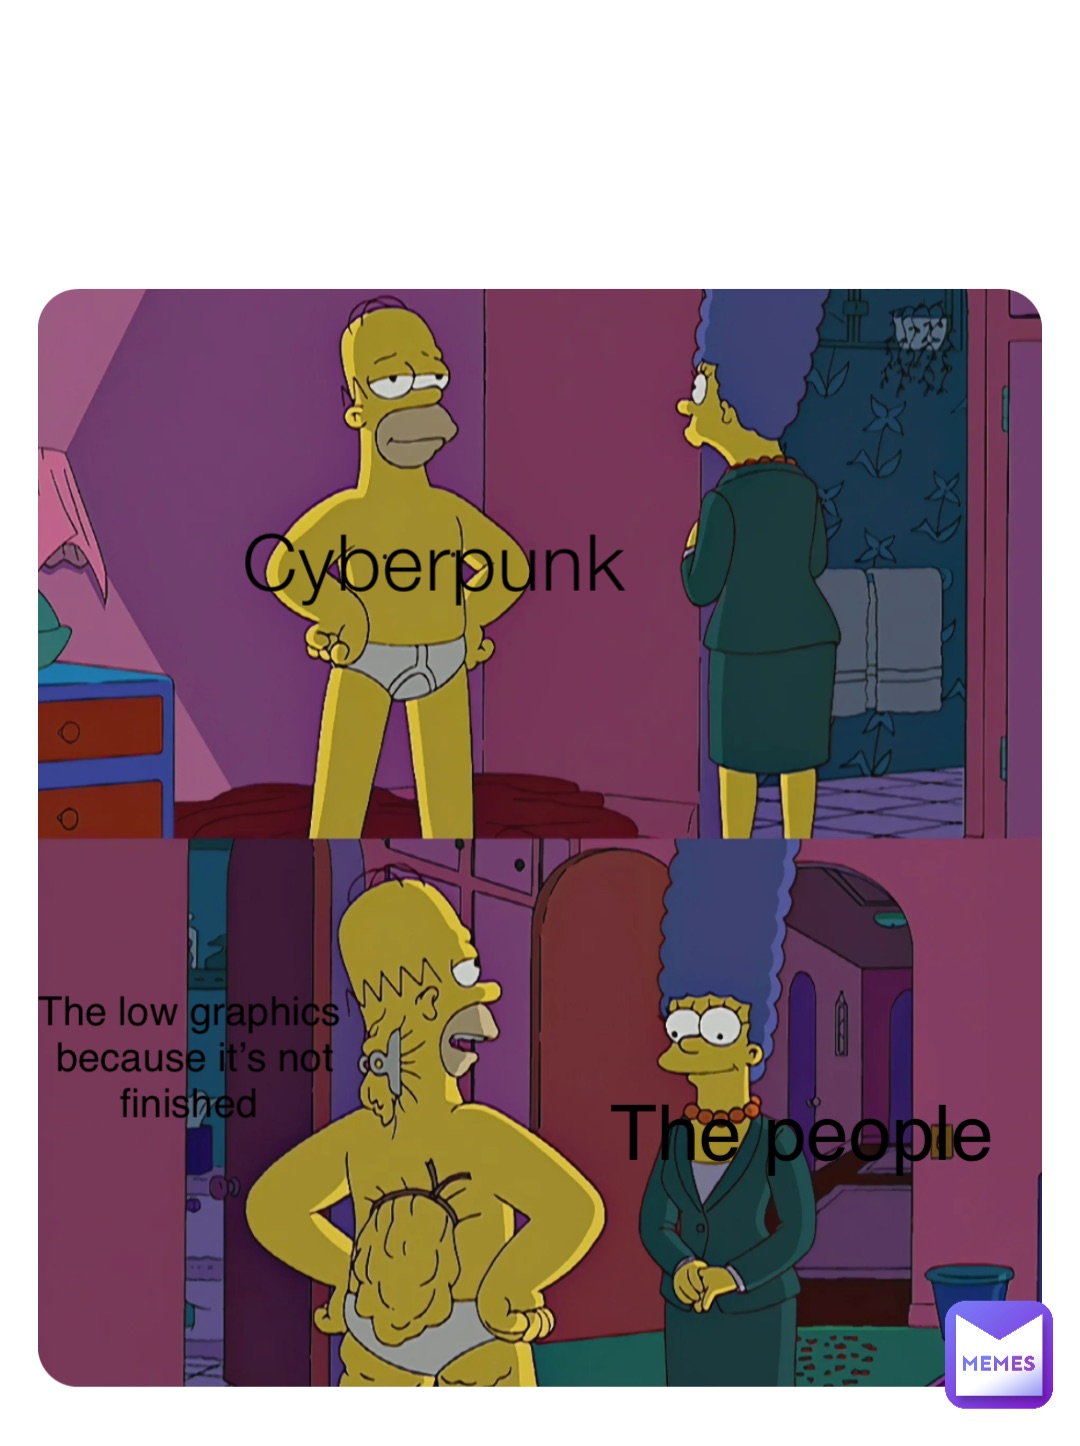 Cyberpunk The people The low graphics because it’s not finished